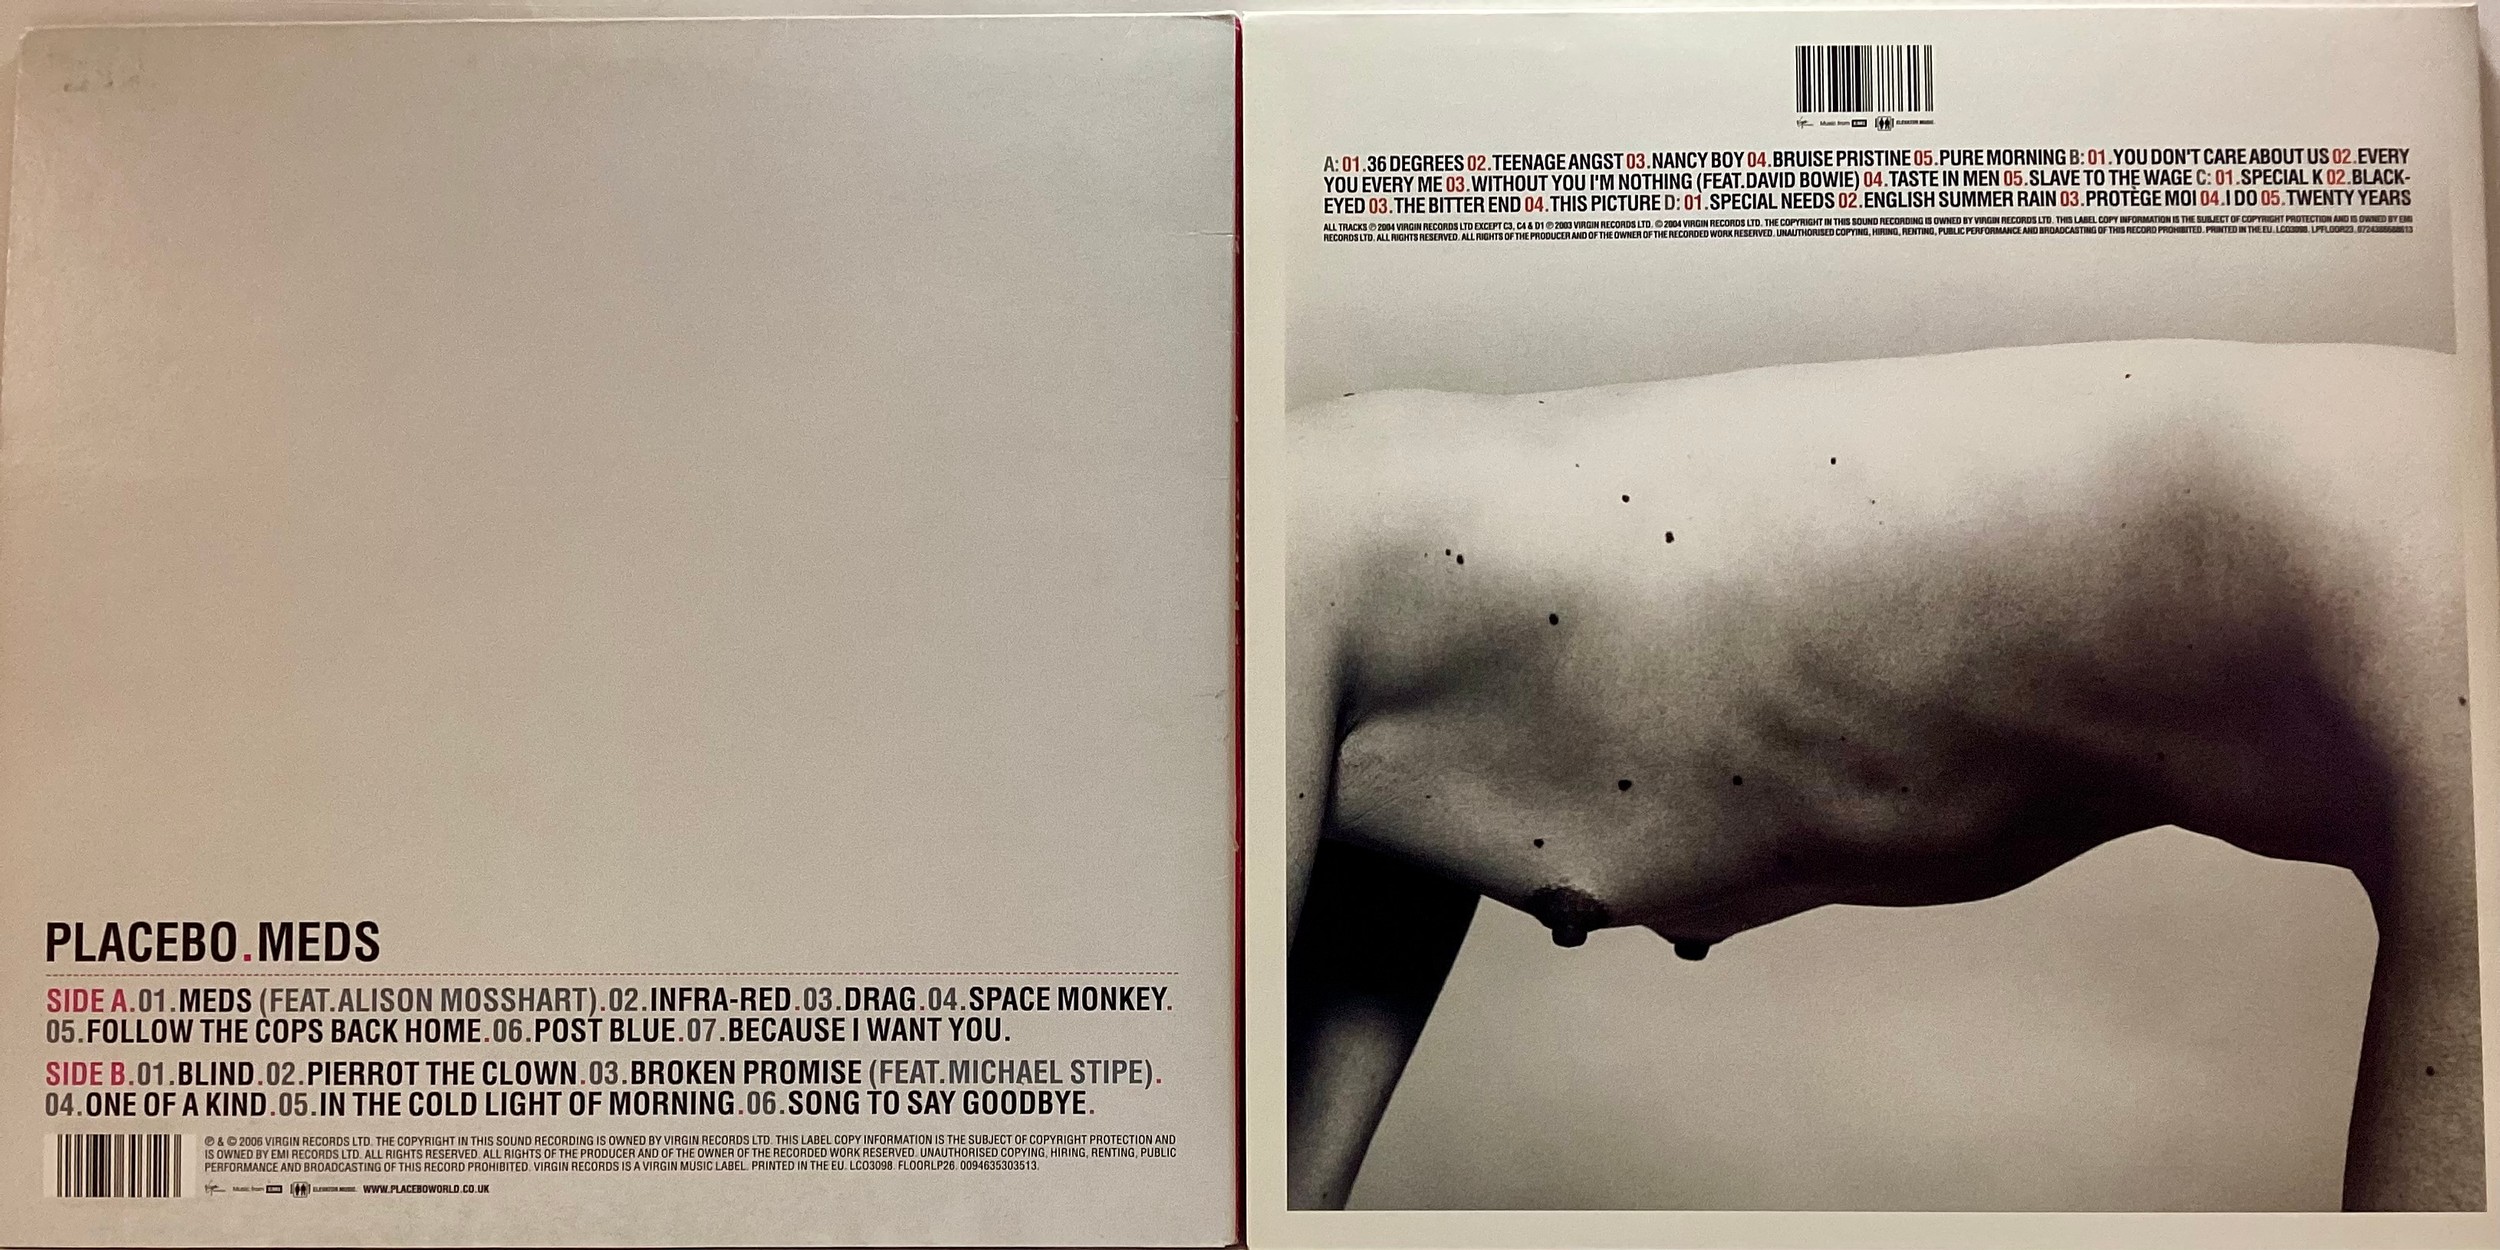 PLACEBO VINYL LP RECORDS X 2. Titles here as follows - ‘Once More With Feeling’ gatefolded sleeve - Image 2 of 3